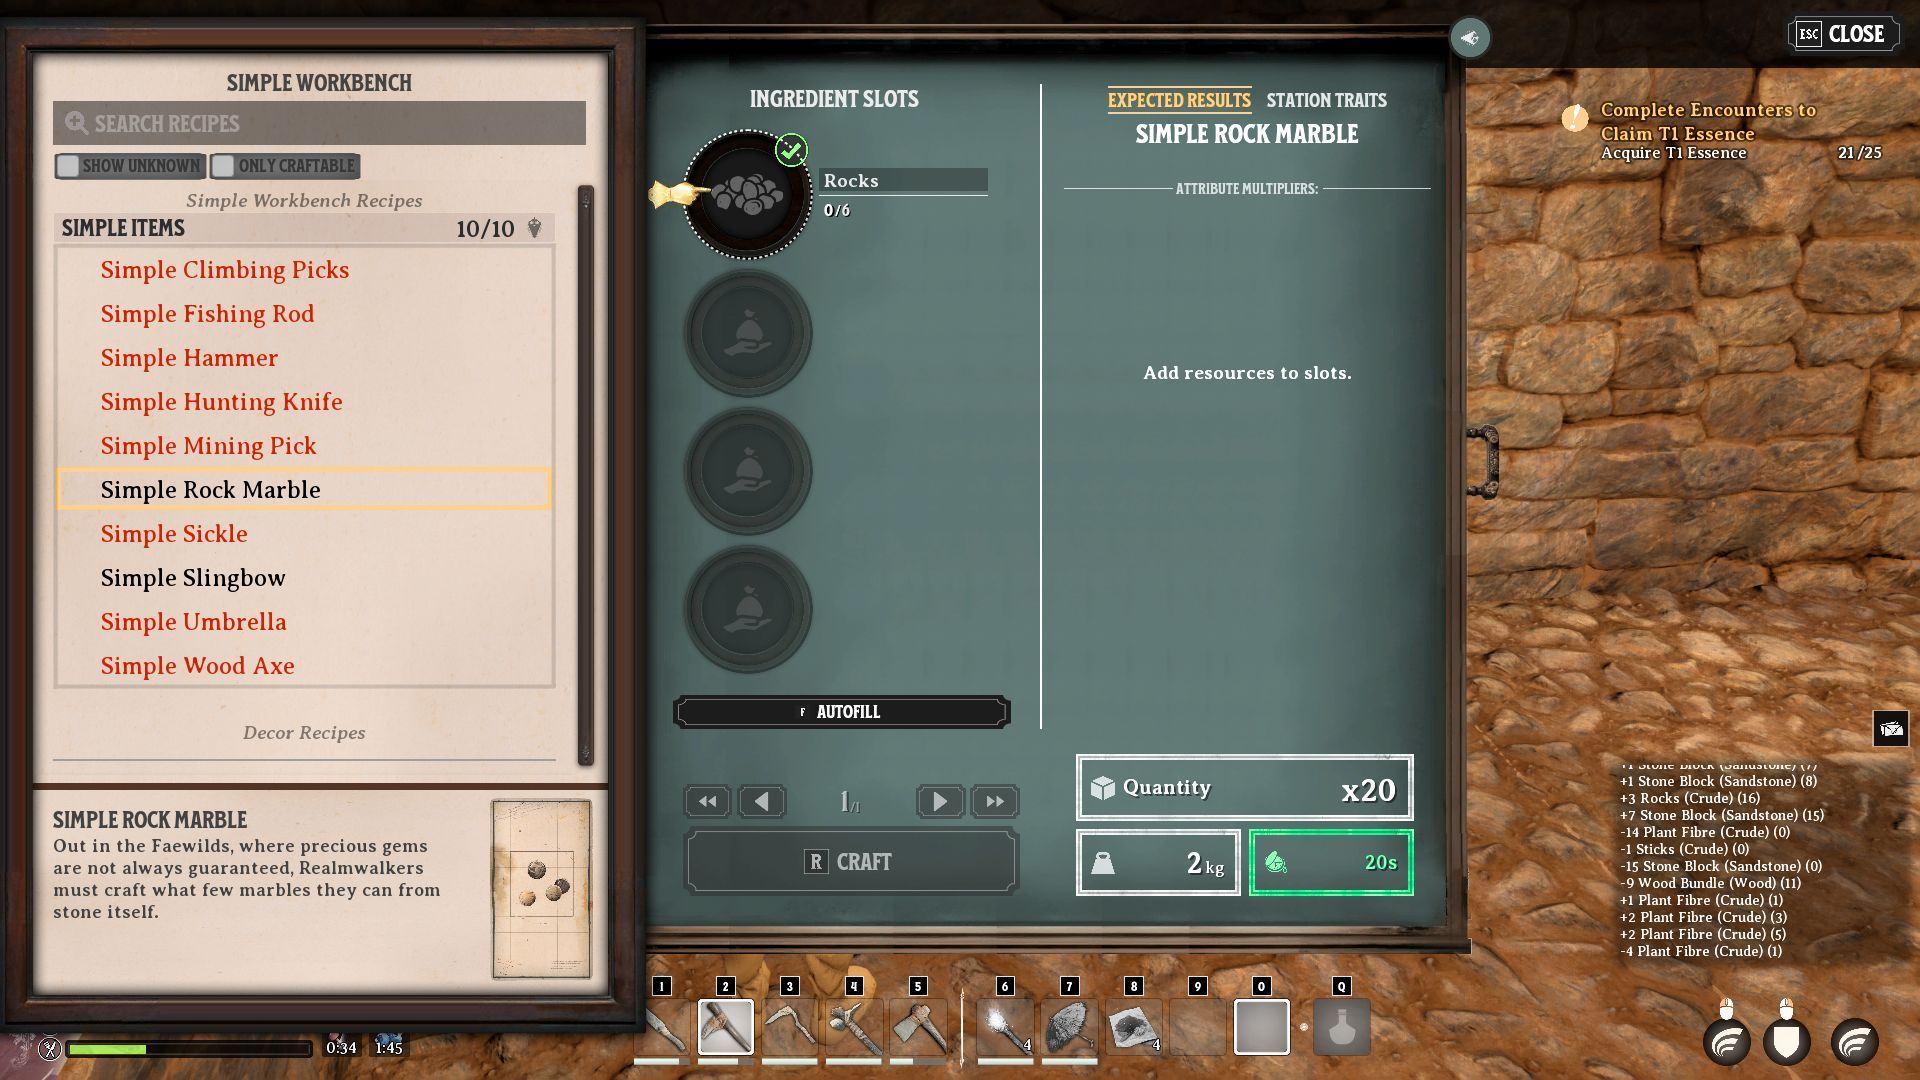 The Simple Workbench menu in Nightingale, showing the requirements to make Rock Marbles